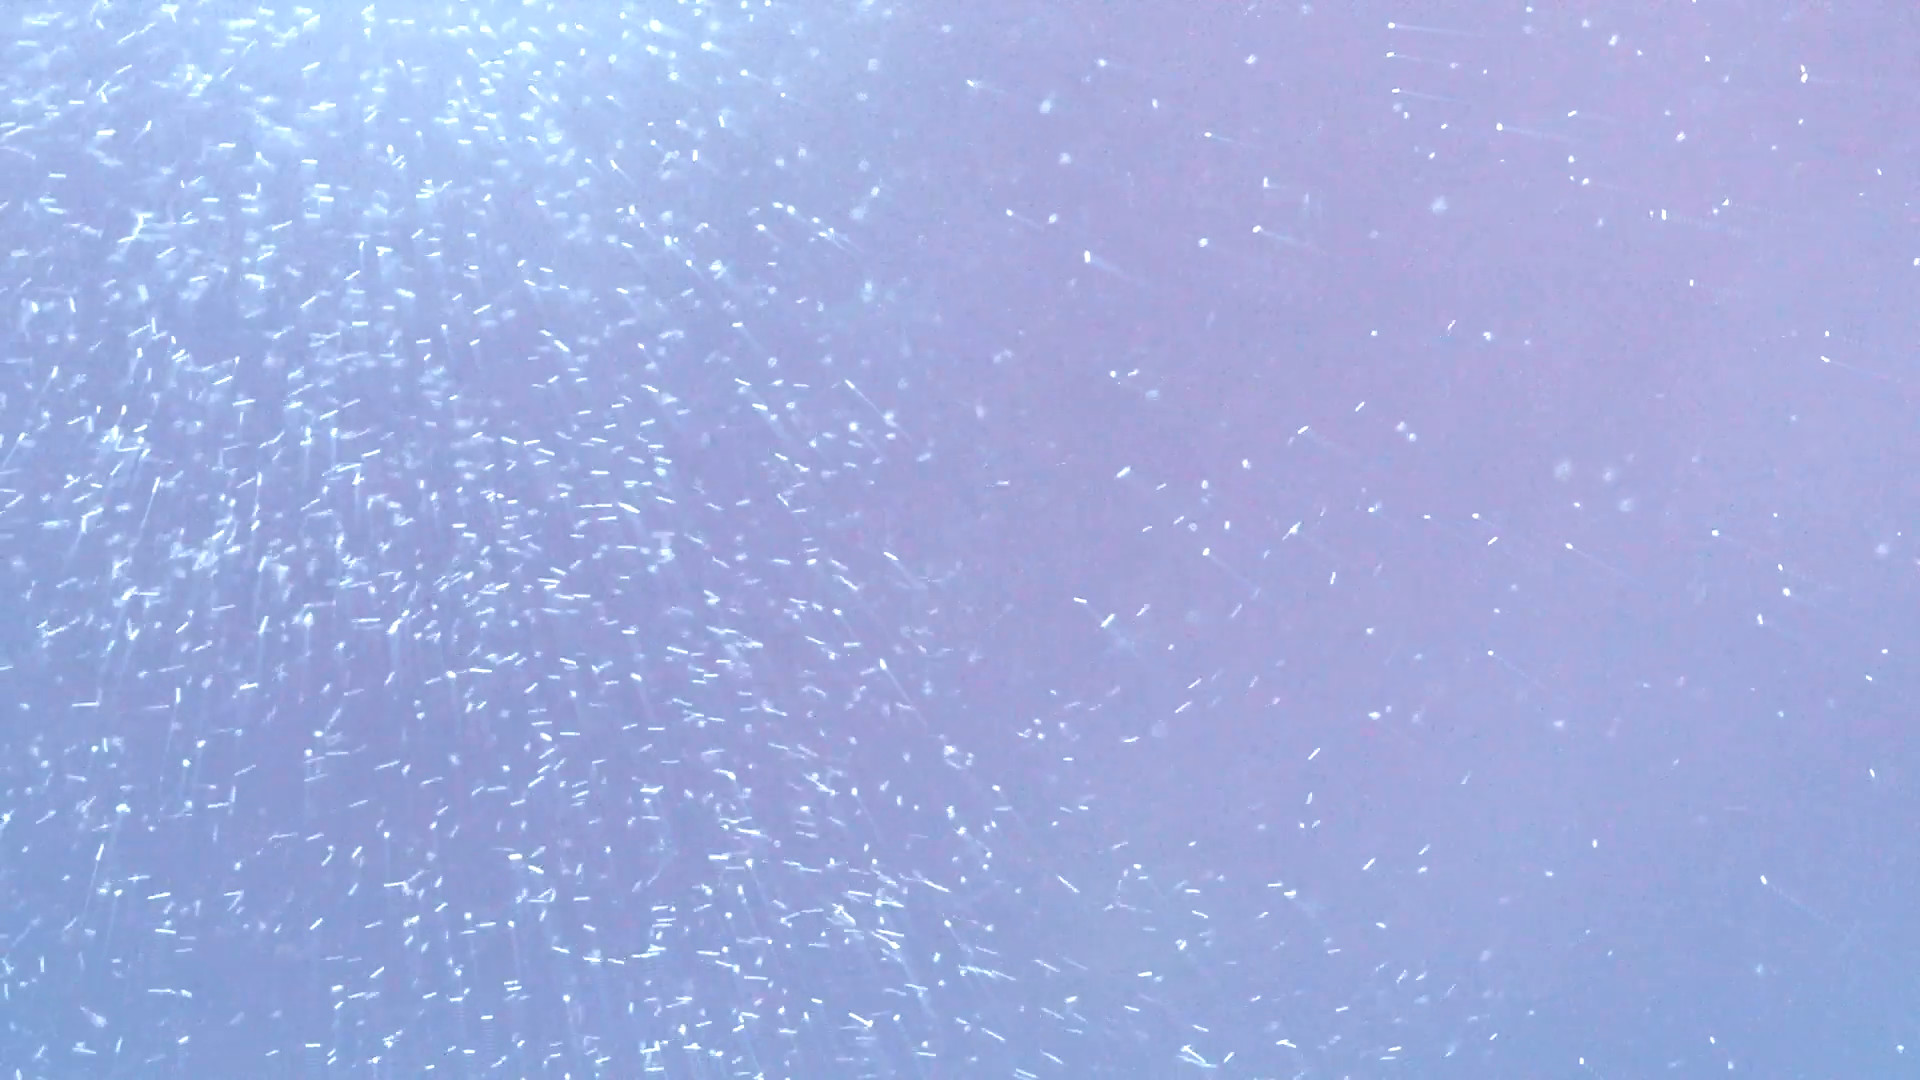 1920x1080 Flying particles 4 - Snowy effect, fairytale, dust, snowflakes- Background  Stock Video Footage - VideoBlocks